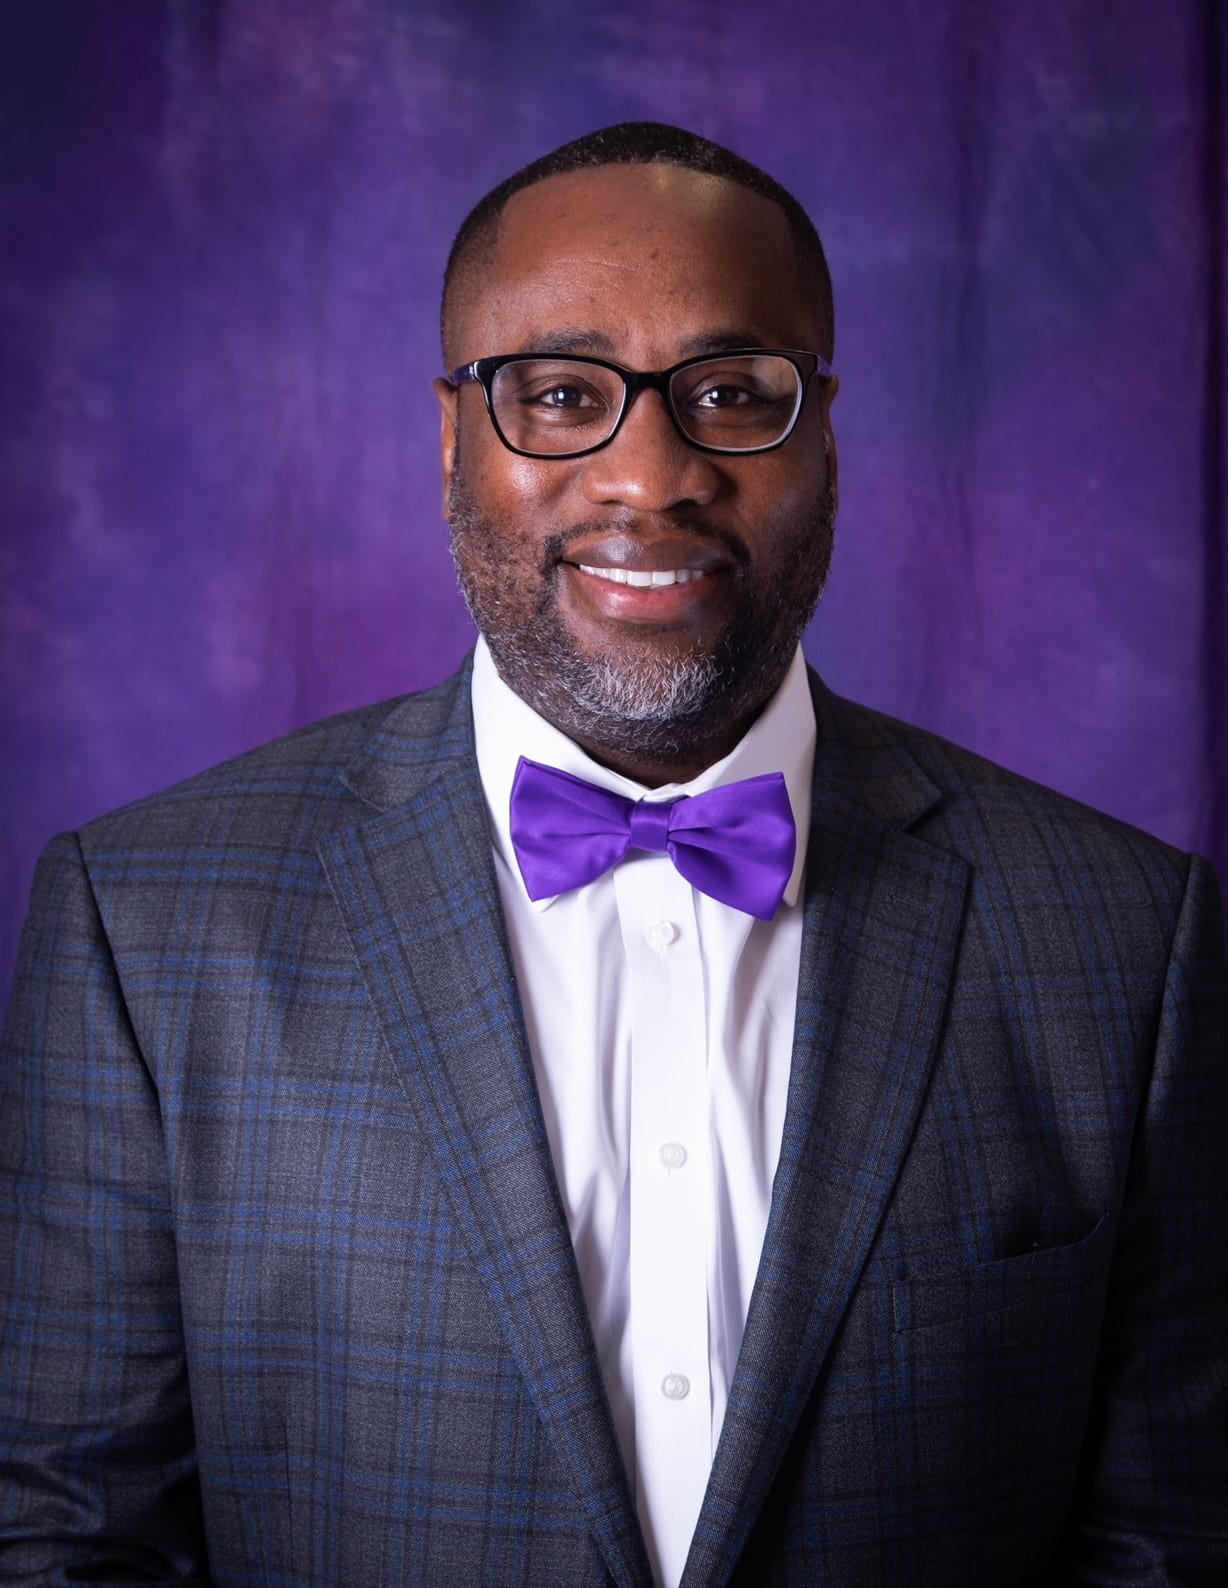 Dr. Andre Emmons